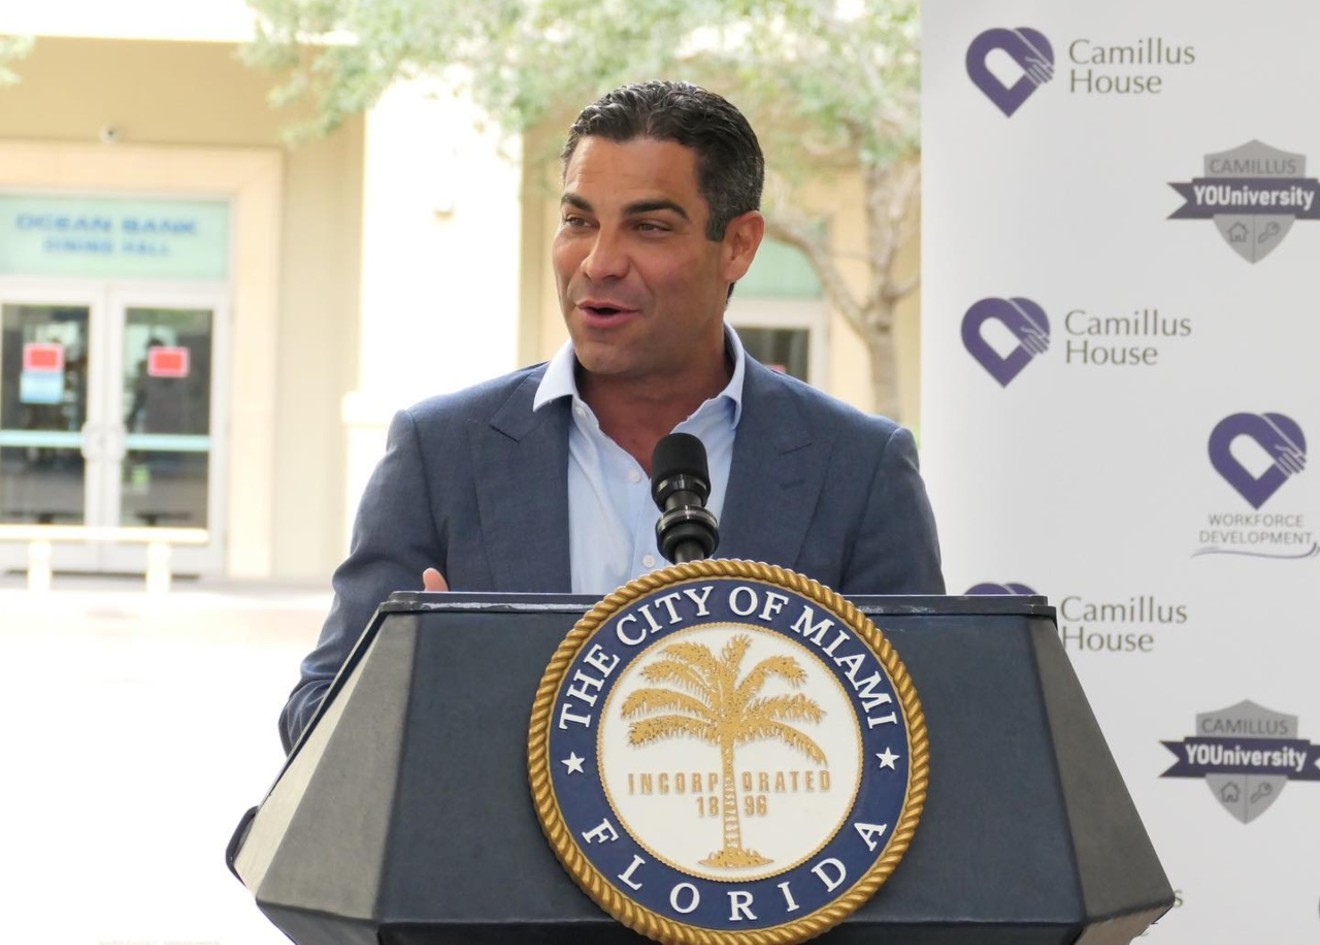 A $500K donation in support of Miami Mayor Francis Suarez's presidential bid is the subject of a complaint filed with the Federal Election Commission.